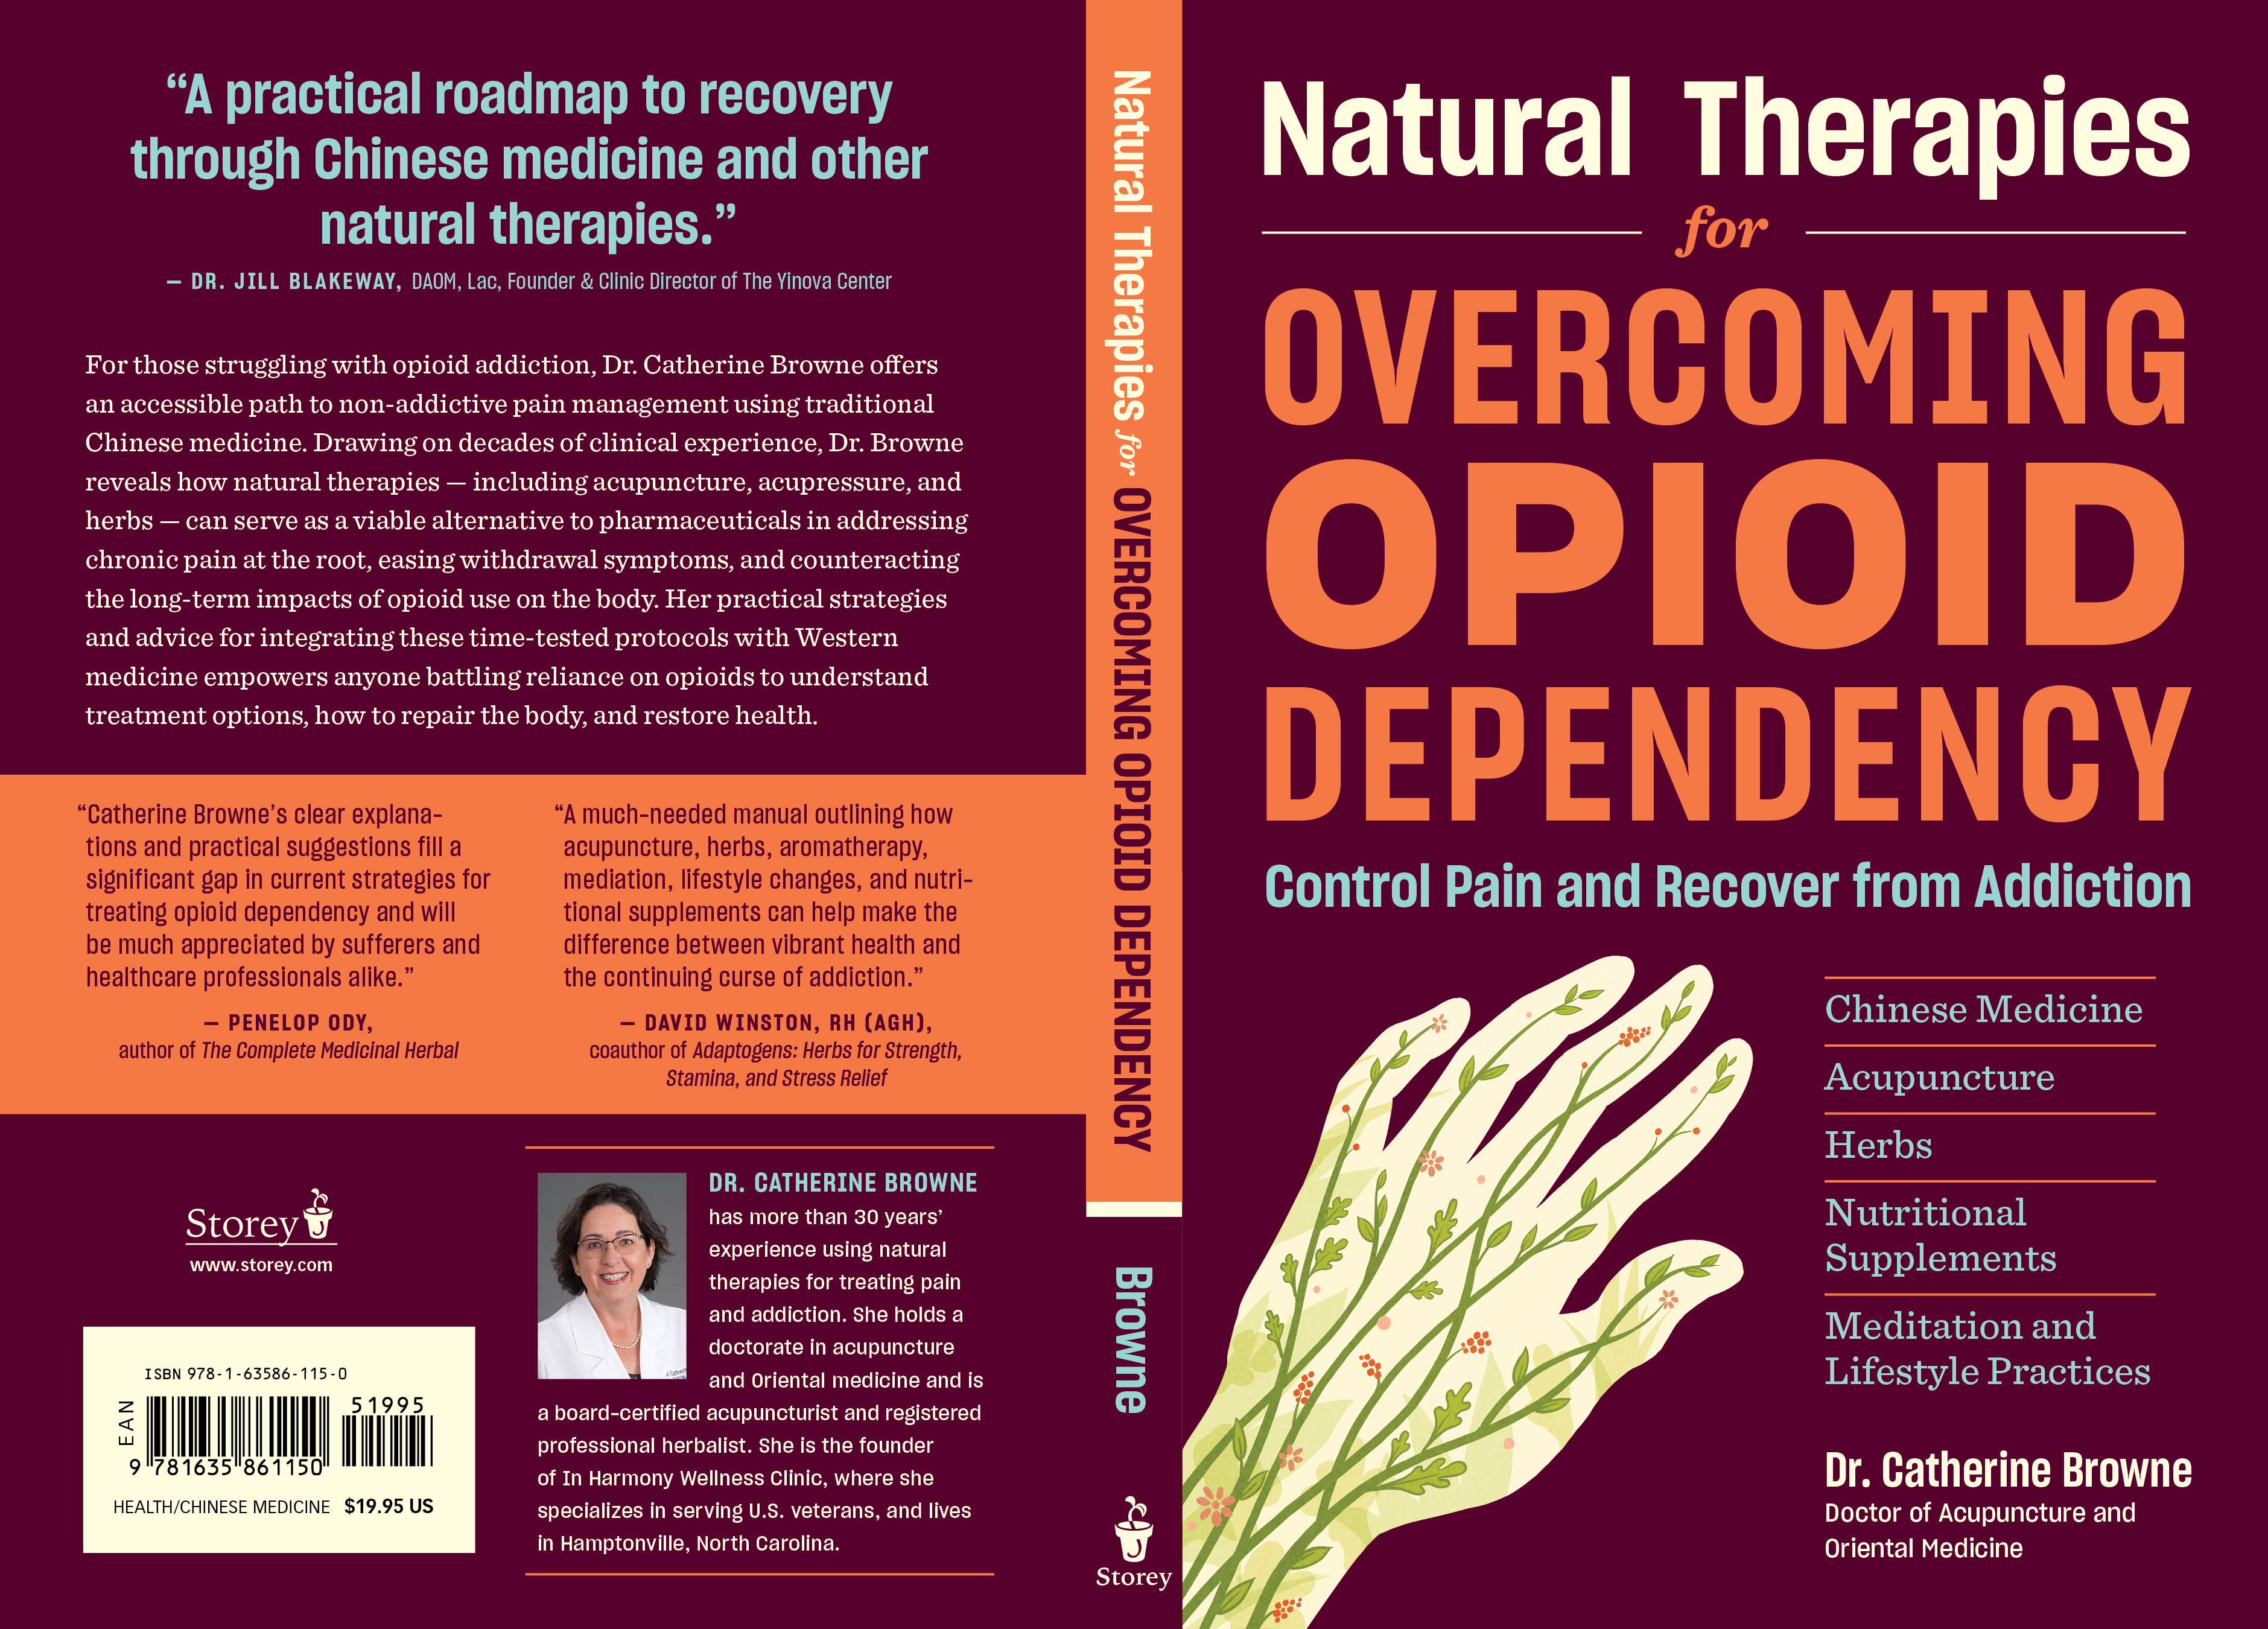 Natural Therapies for Overcoming Opioid Dependency